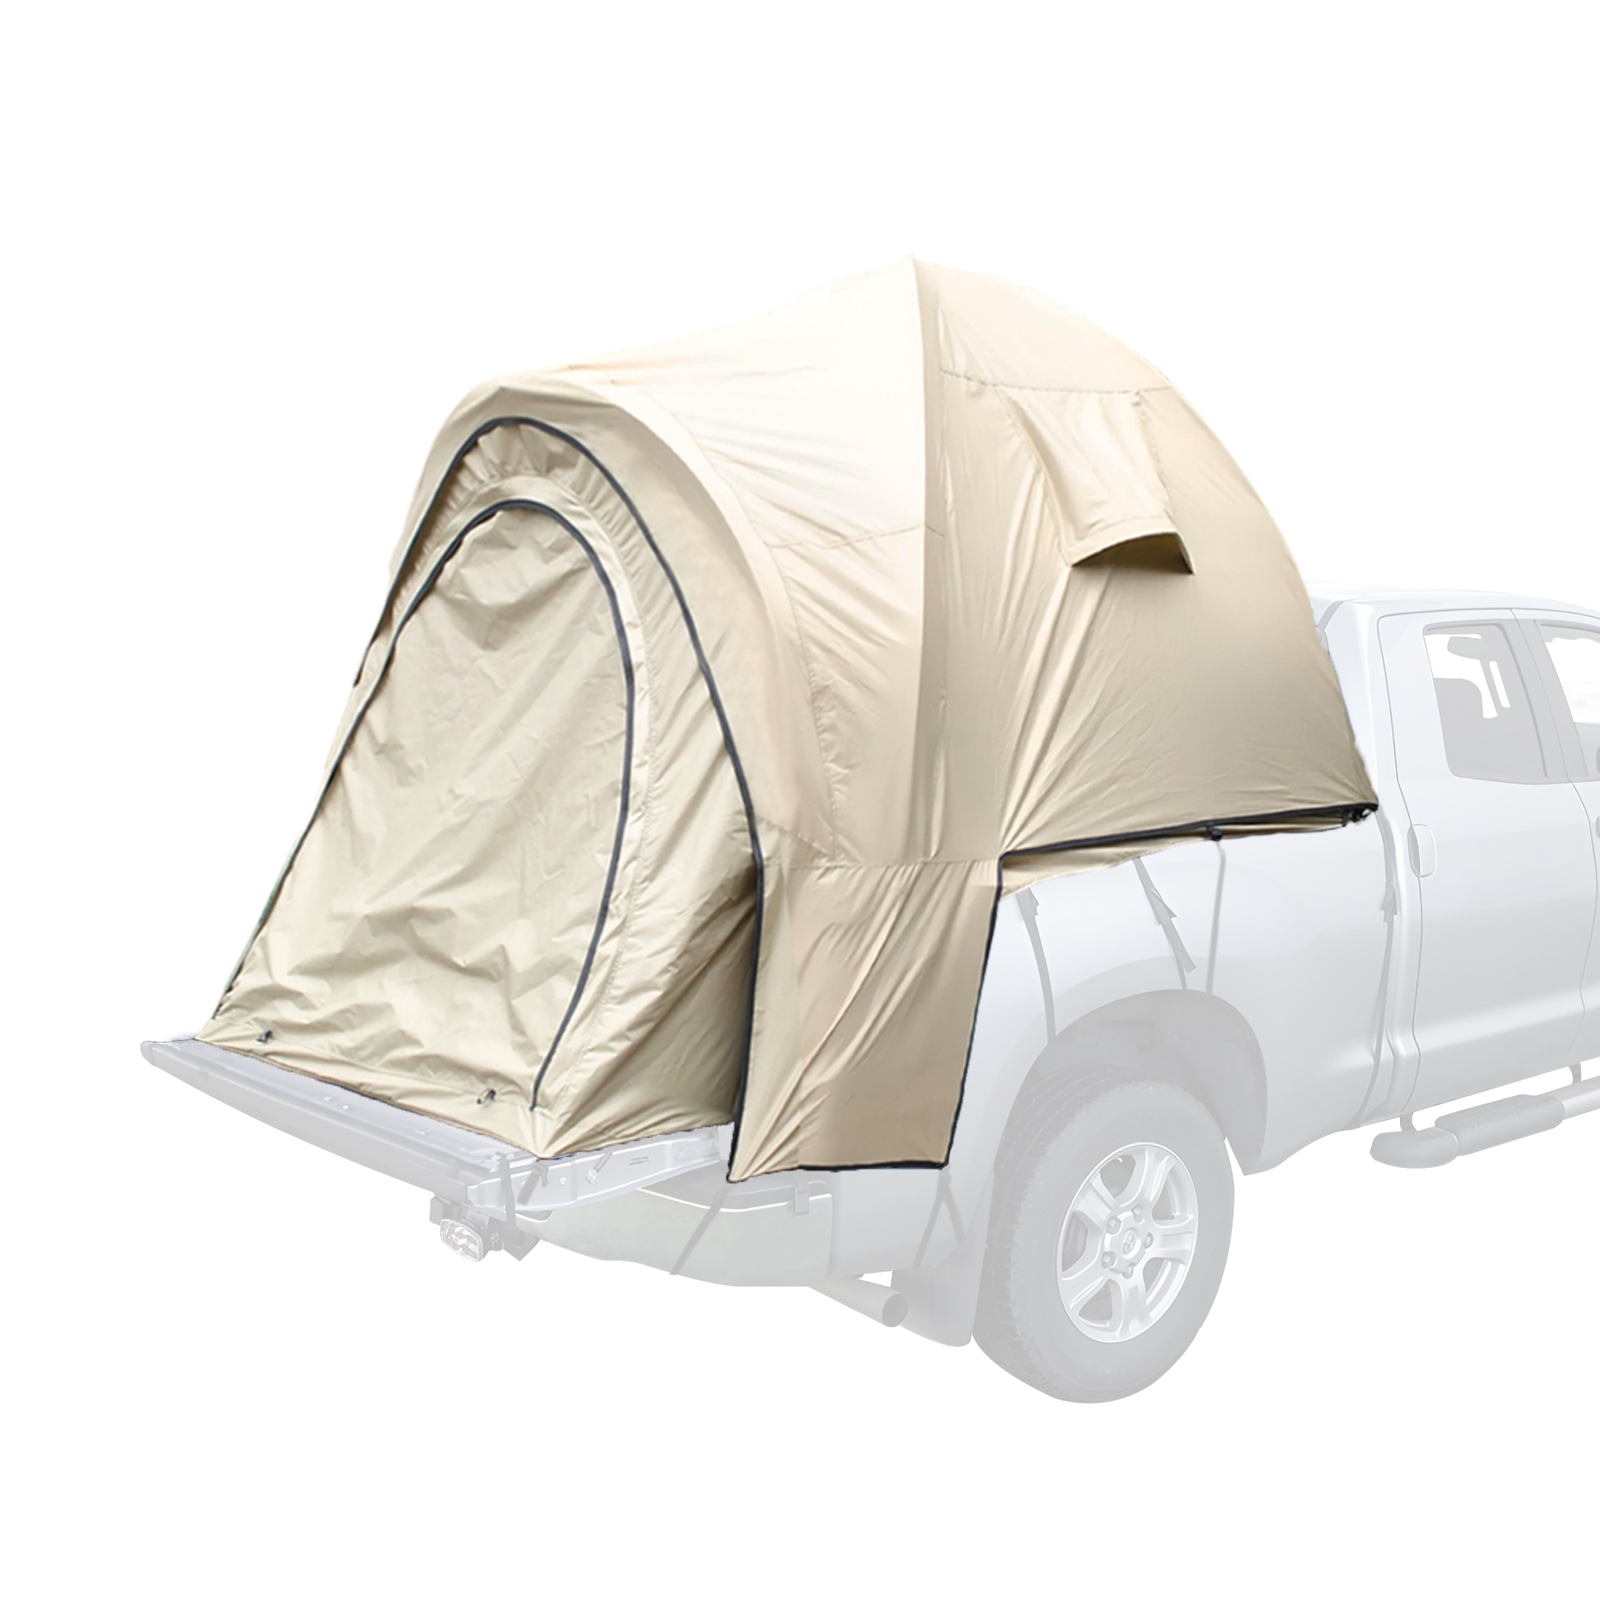 Pickup Truckbed Camping Tent Ute Tailgate Shade Side Awning Canopy Portable Outdoor Shelter